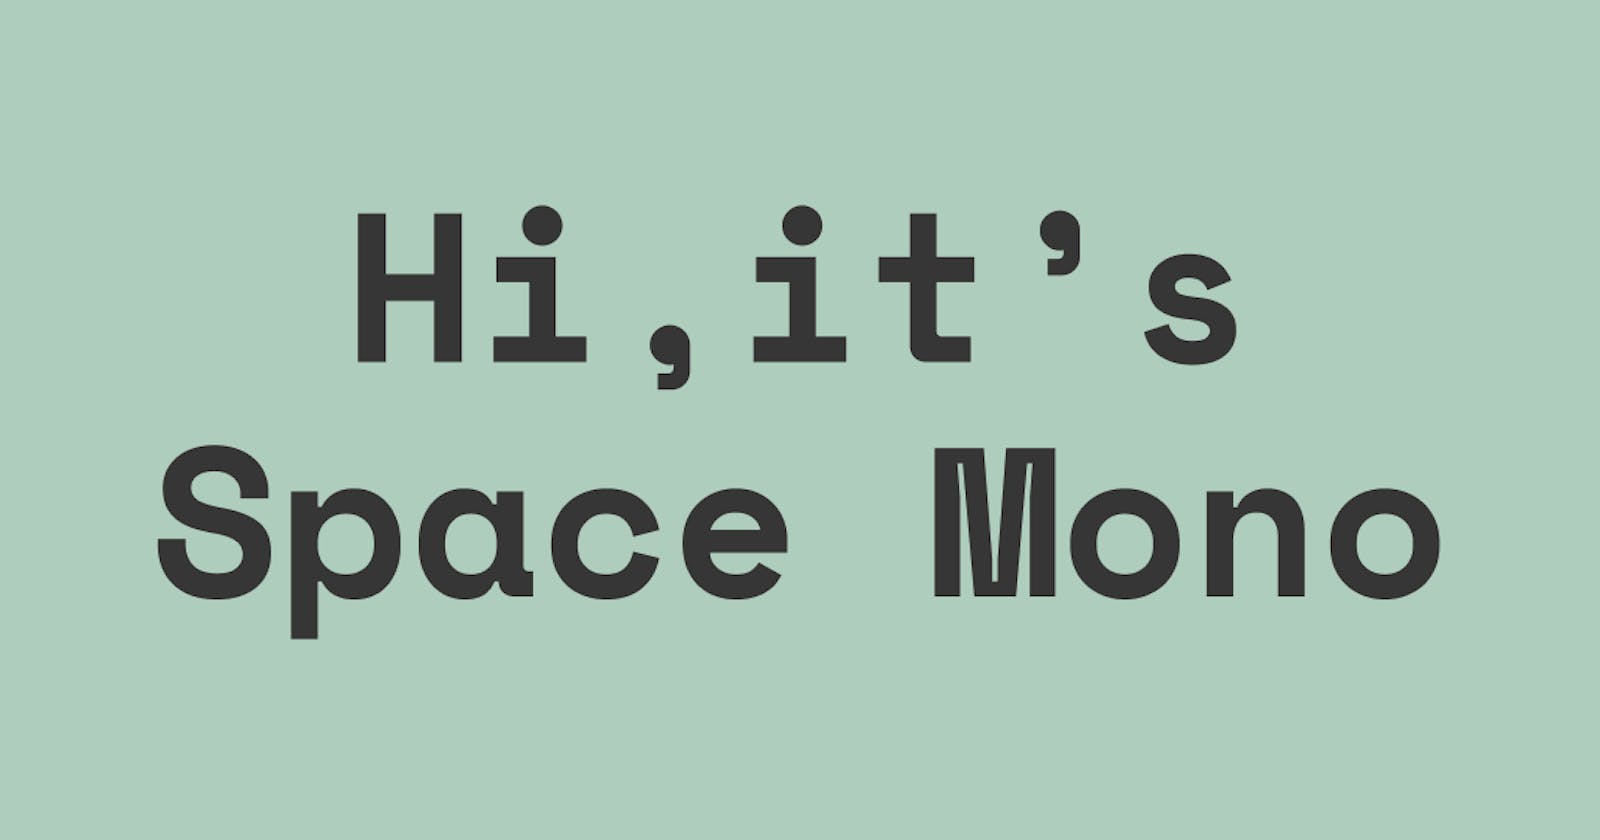 Eclectic Nerdy Font Space Mono & How to Use It